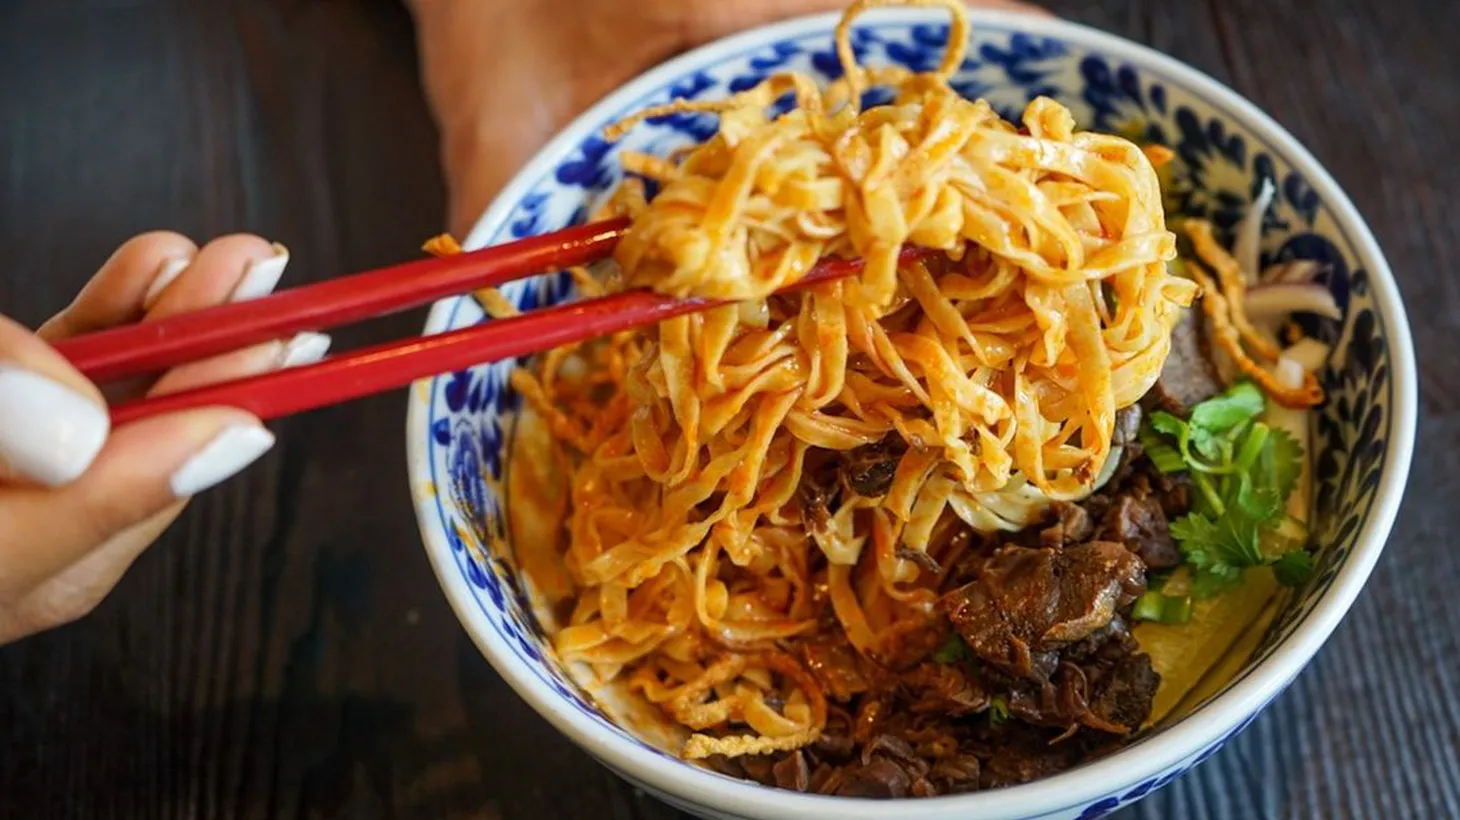 At Chao Krung, Chinese dishes like chow mein and egg foo young have been replaced by Thai dishes such as khao soi noodles.